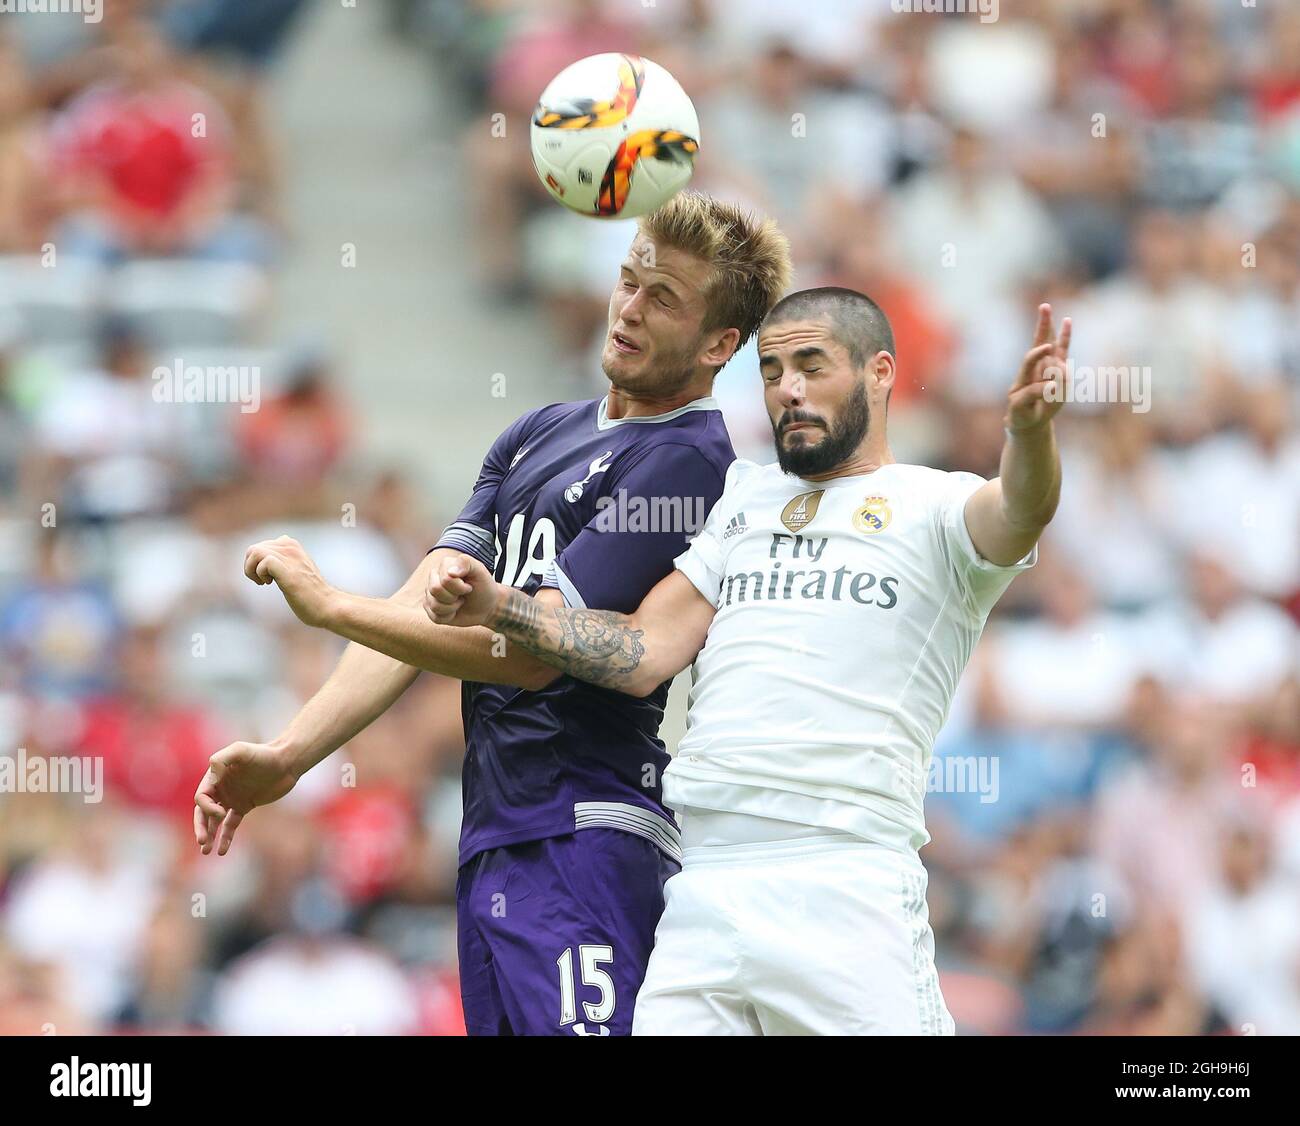 Image Aug 4 15 Munich United Kingdom Real Madrid S Isco Tussles With Tottenham S Eric Dier Audi Cup Real Madrid Vs Tottenham Hotspur Allianz Arena Munich Germany 4th August 15 Stock Photo Alamy